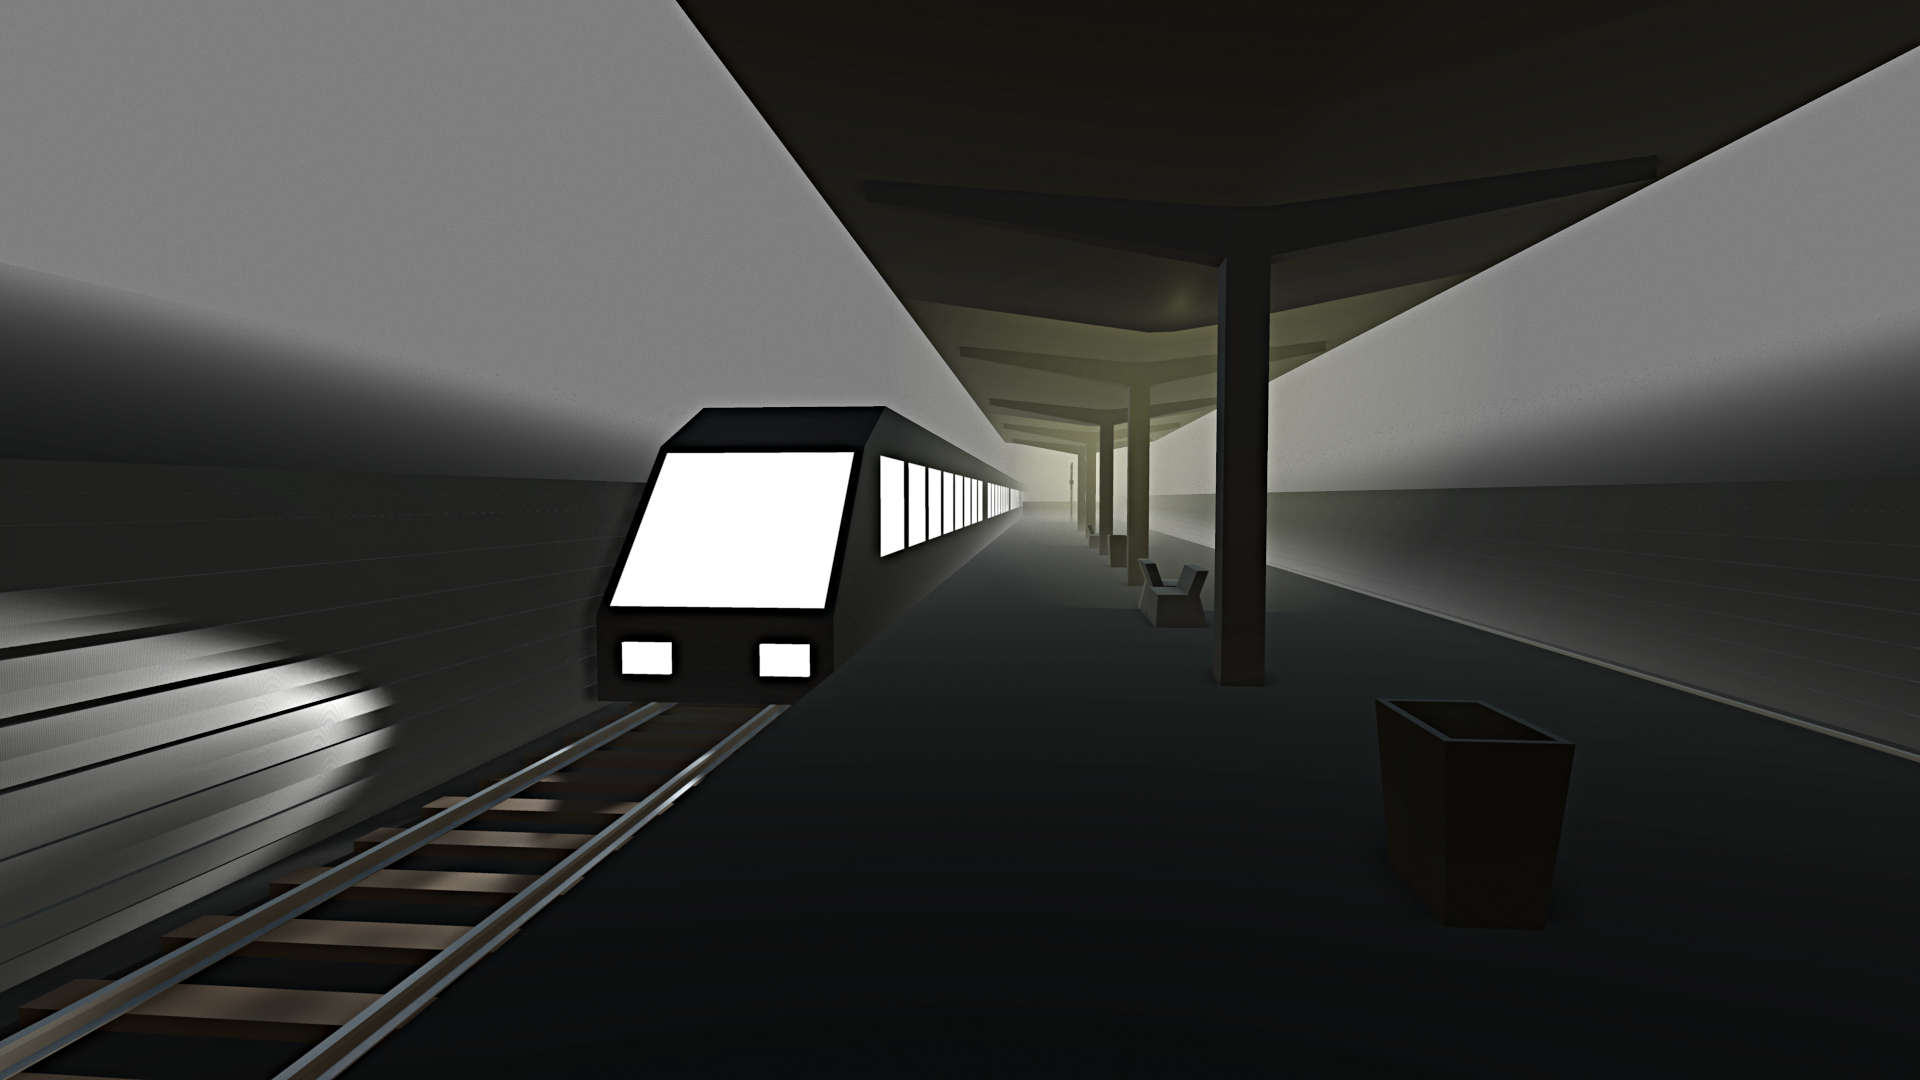 screenshot / computer generated - POV on platform with approaching train